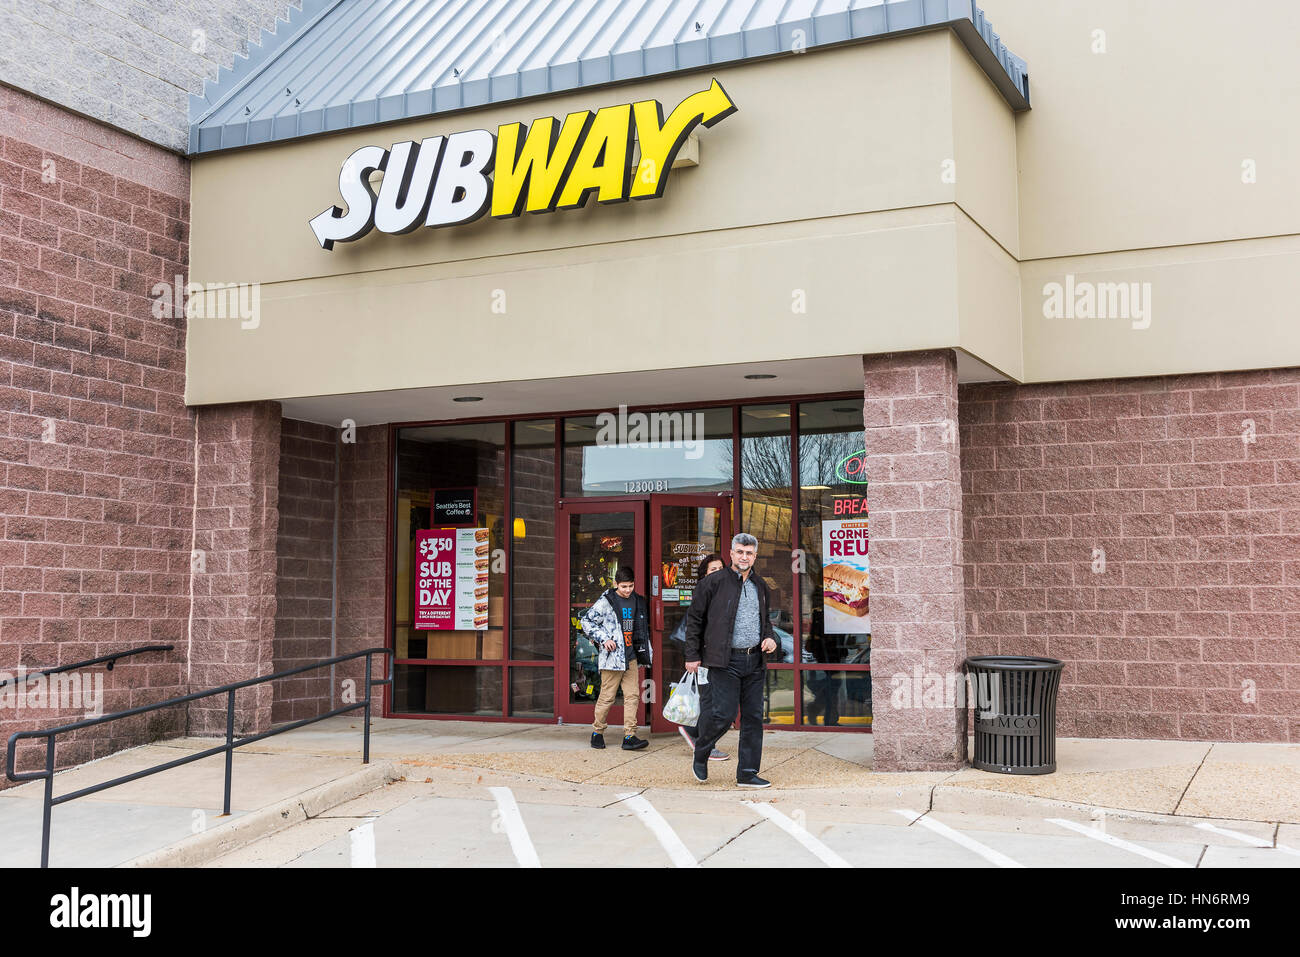 Fairfax, USA - December 11, 2016: Subway sandwich fast food store facade and sign with family walking out Stock Photo